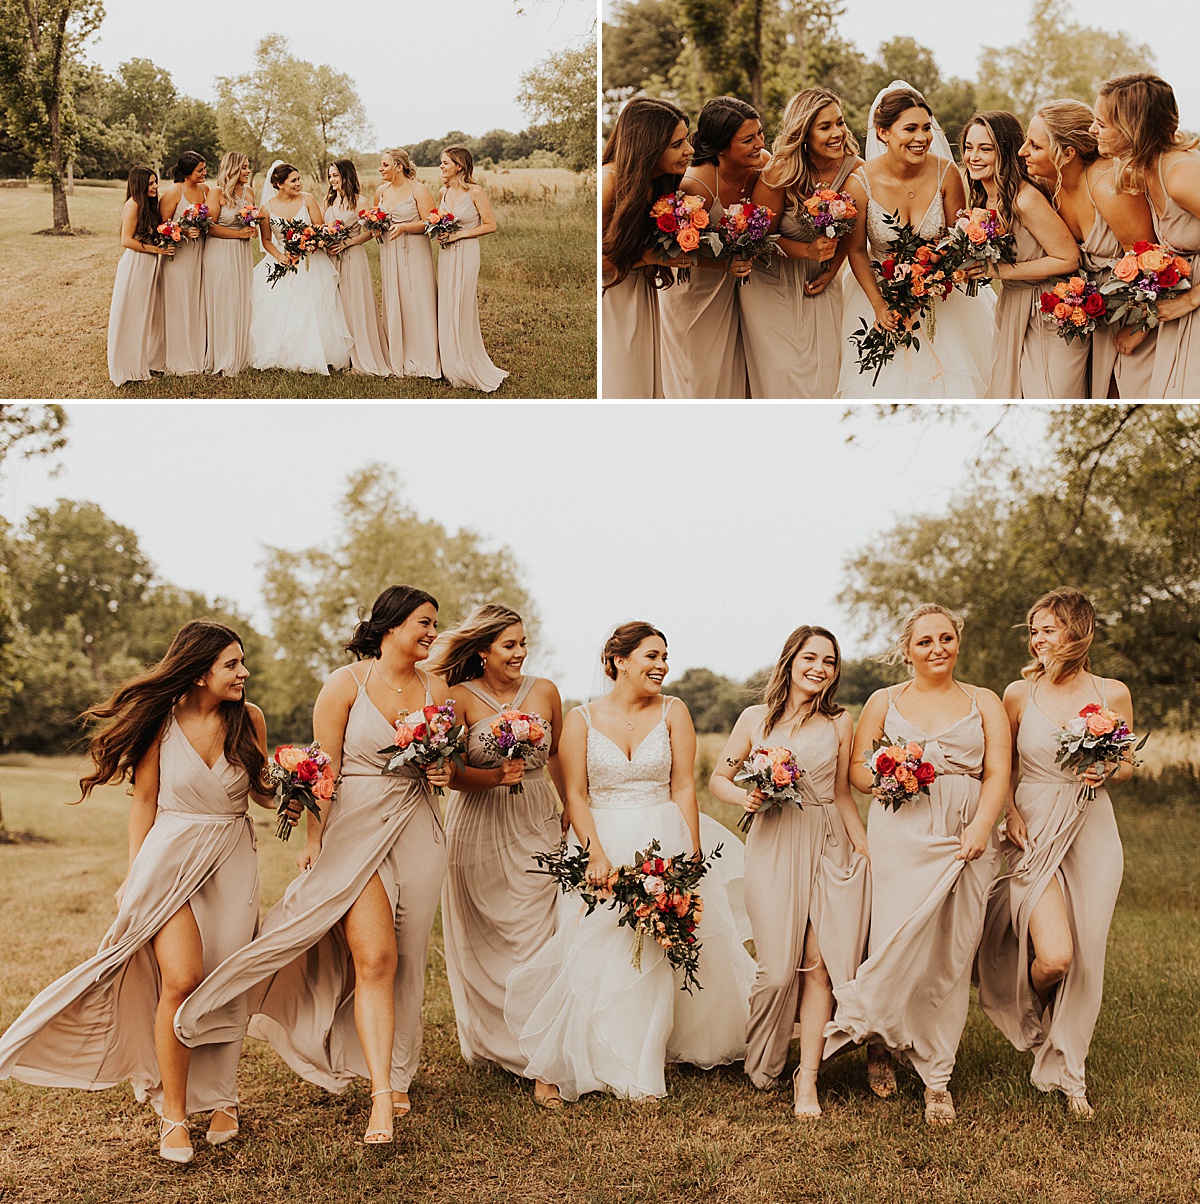 A bridesmaids group photo at their wedding at Red Bird Fields in Austin, TX.